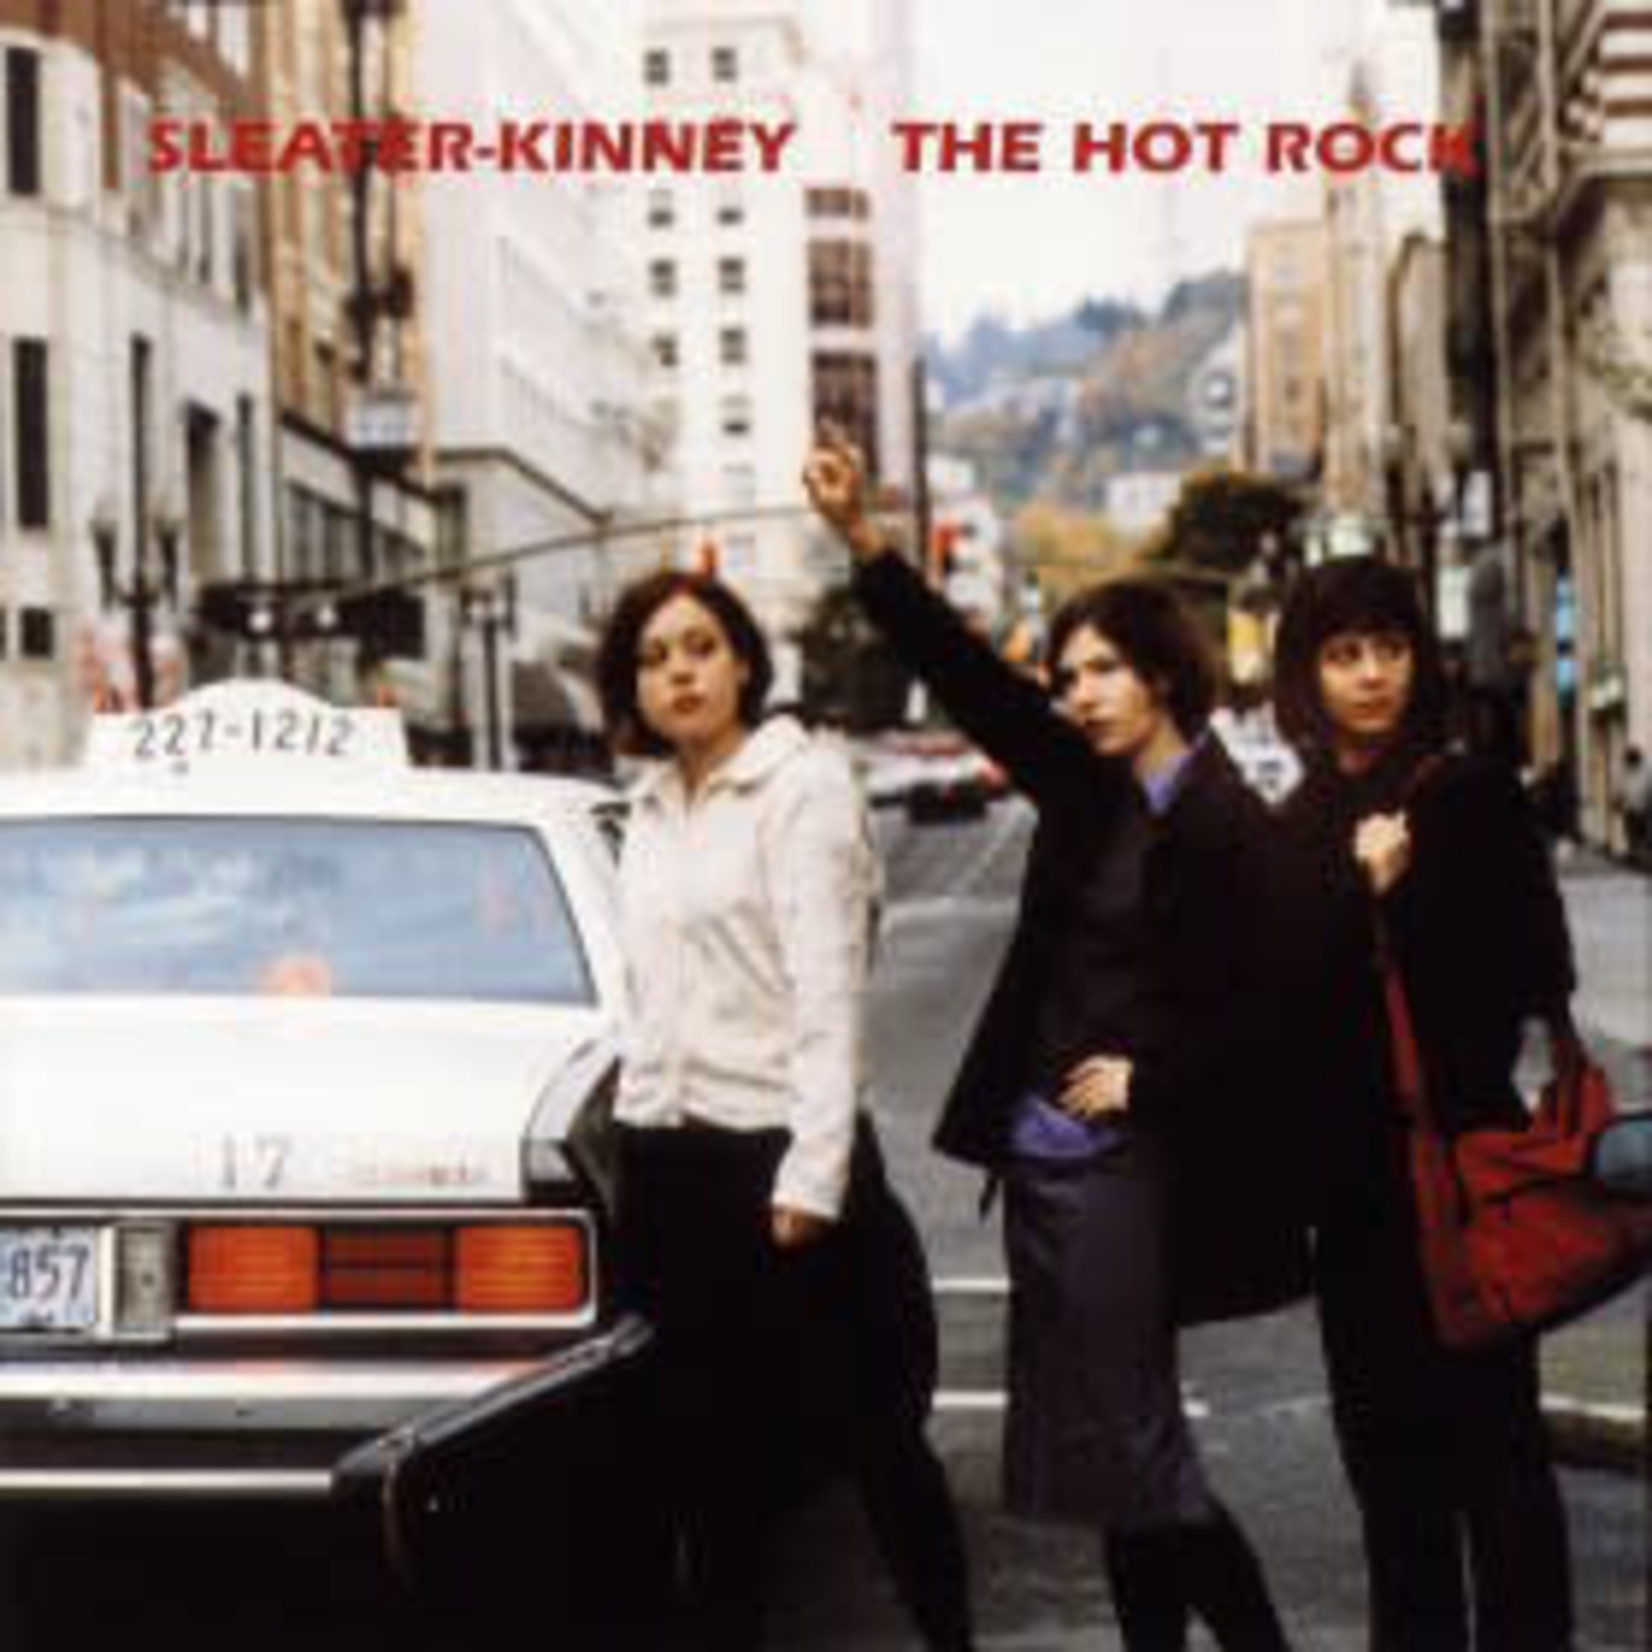 [New] Sleater-Kinney - The Hot Rock